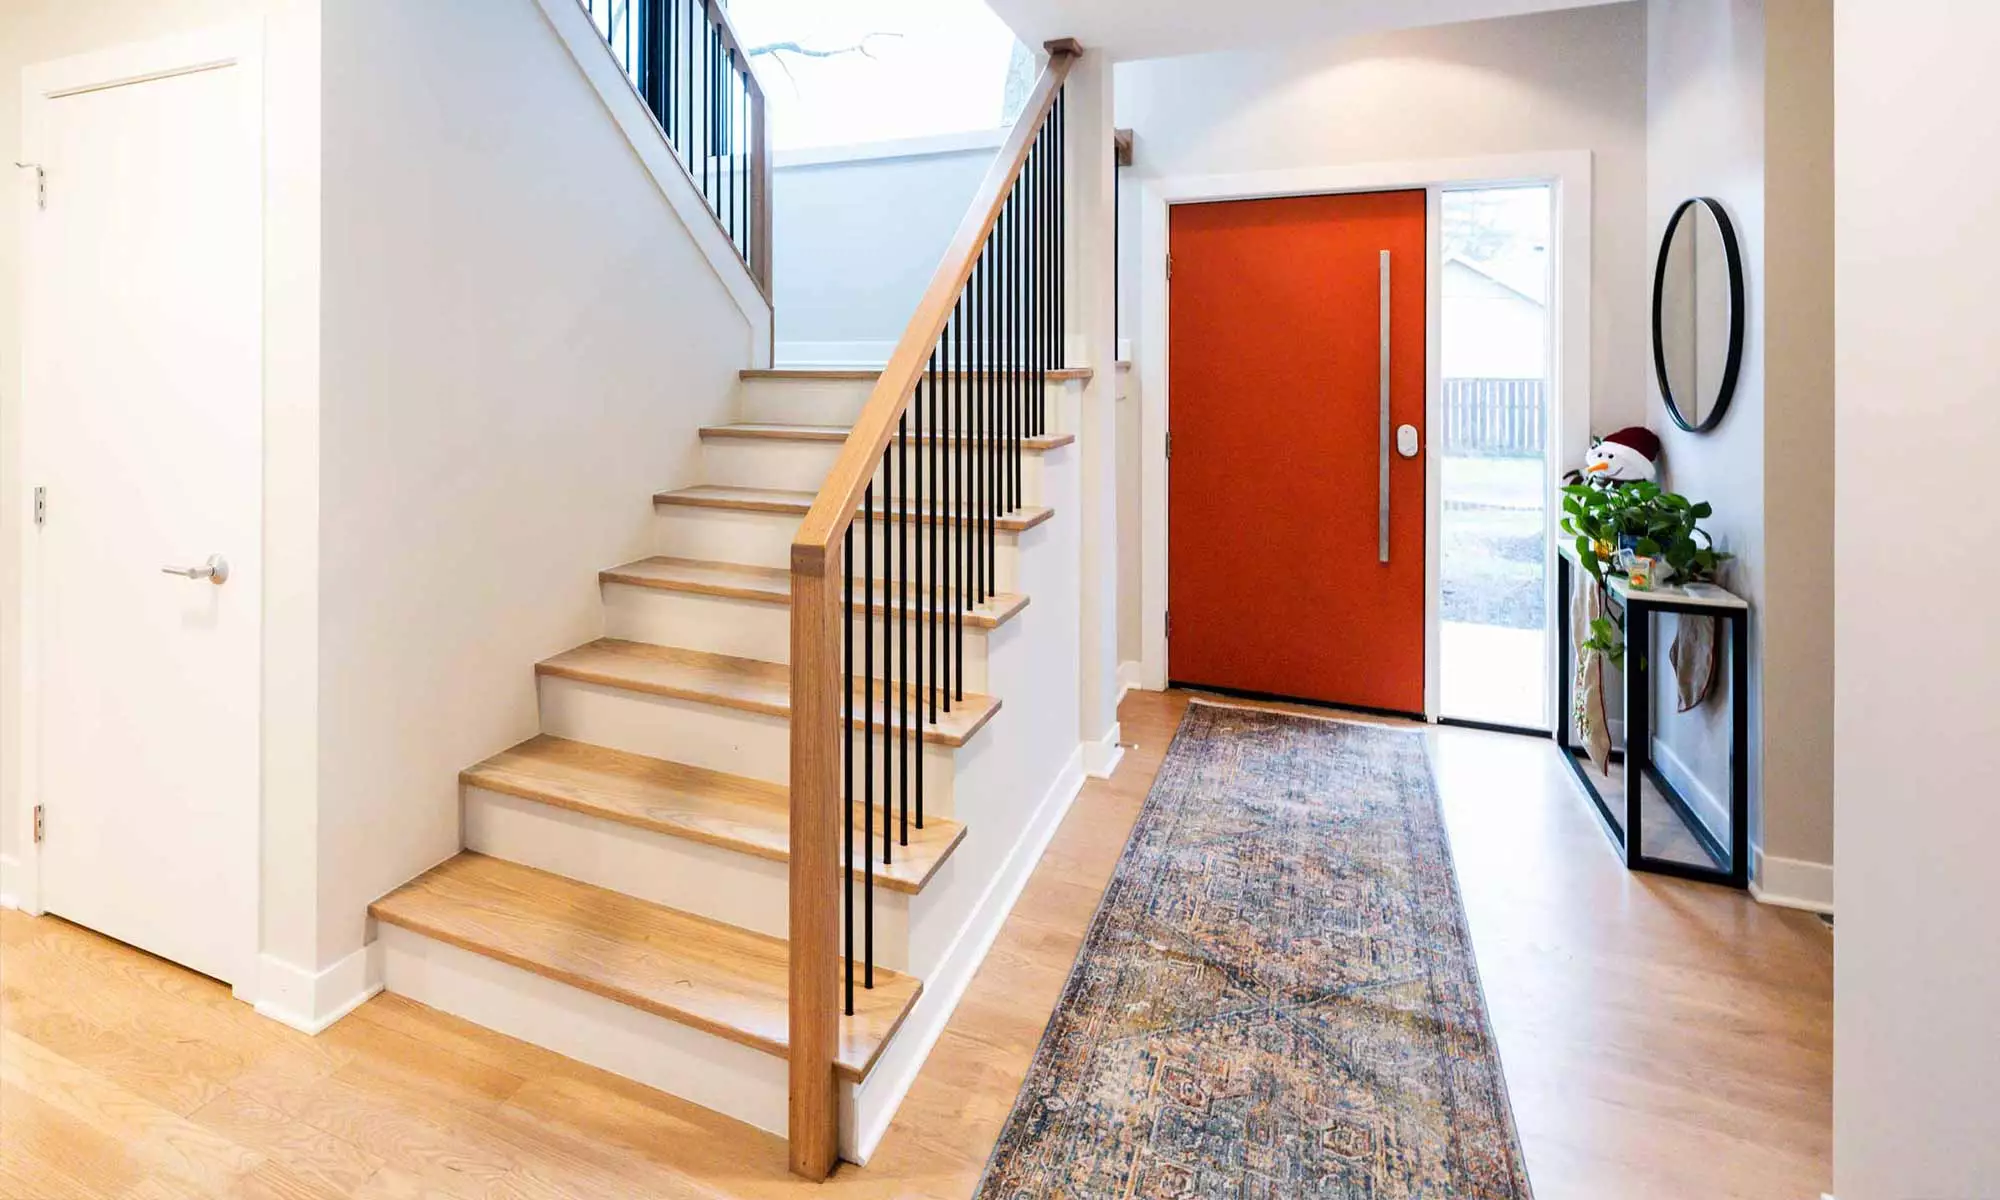 white oak stairway viewed from entrance hall in luxury second floor addition with modern orange front door